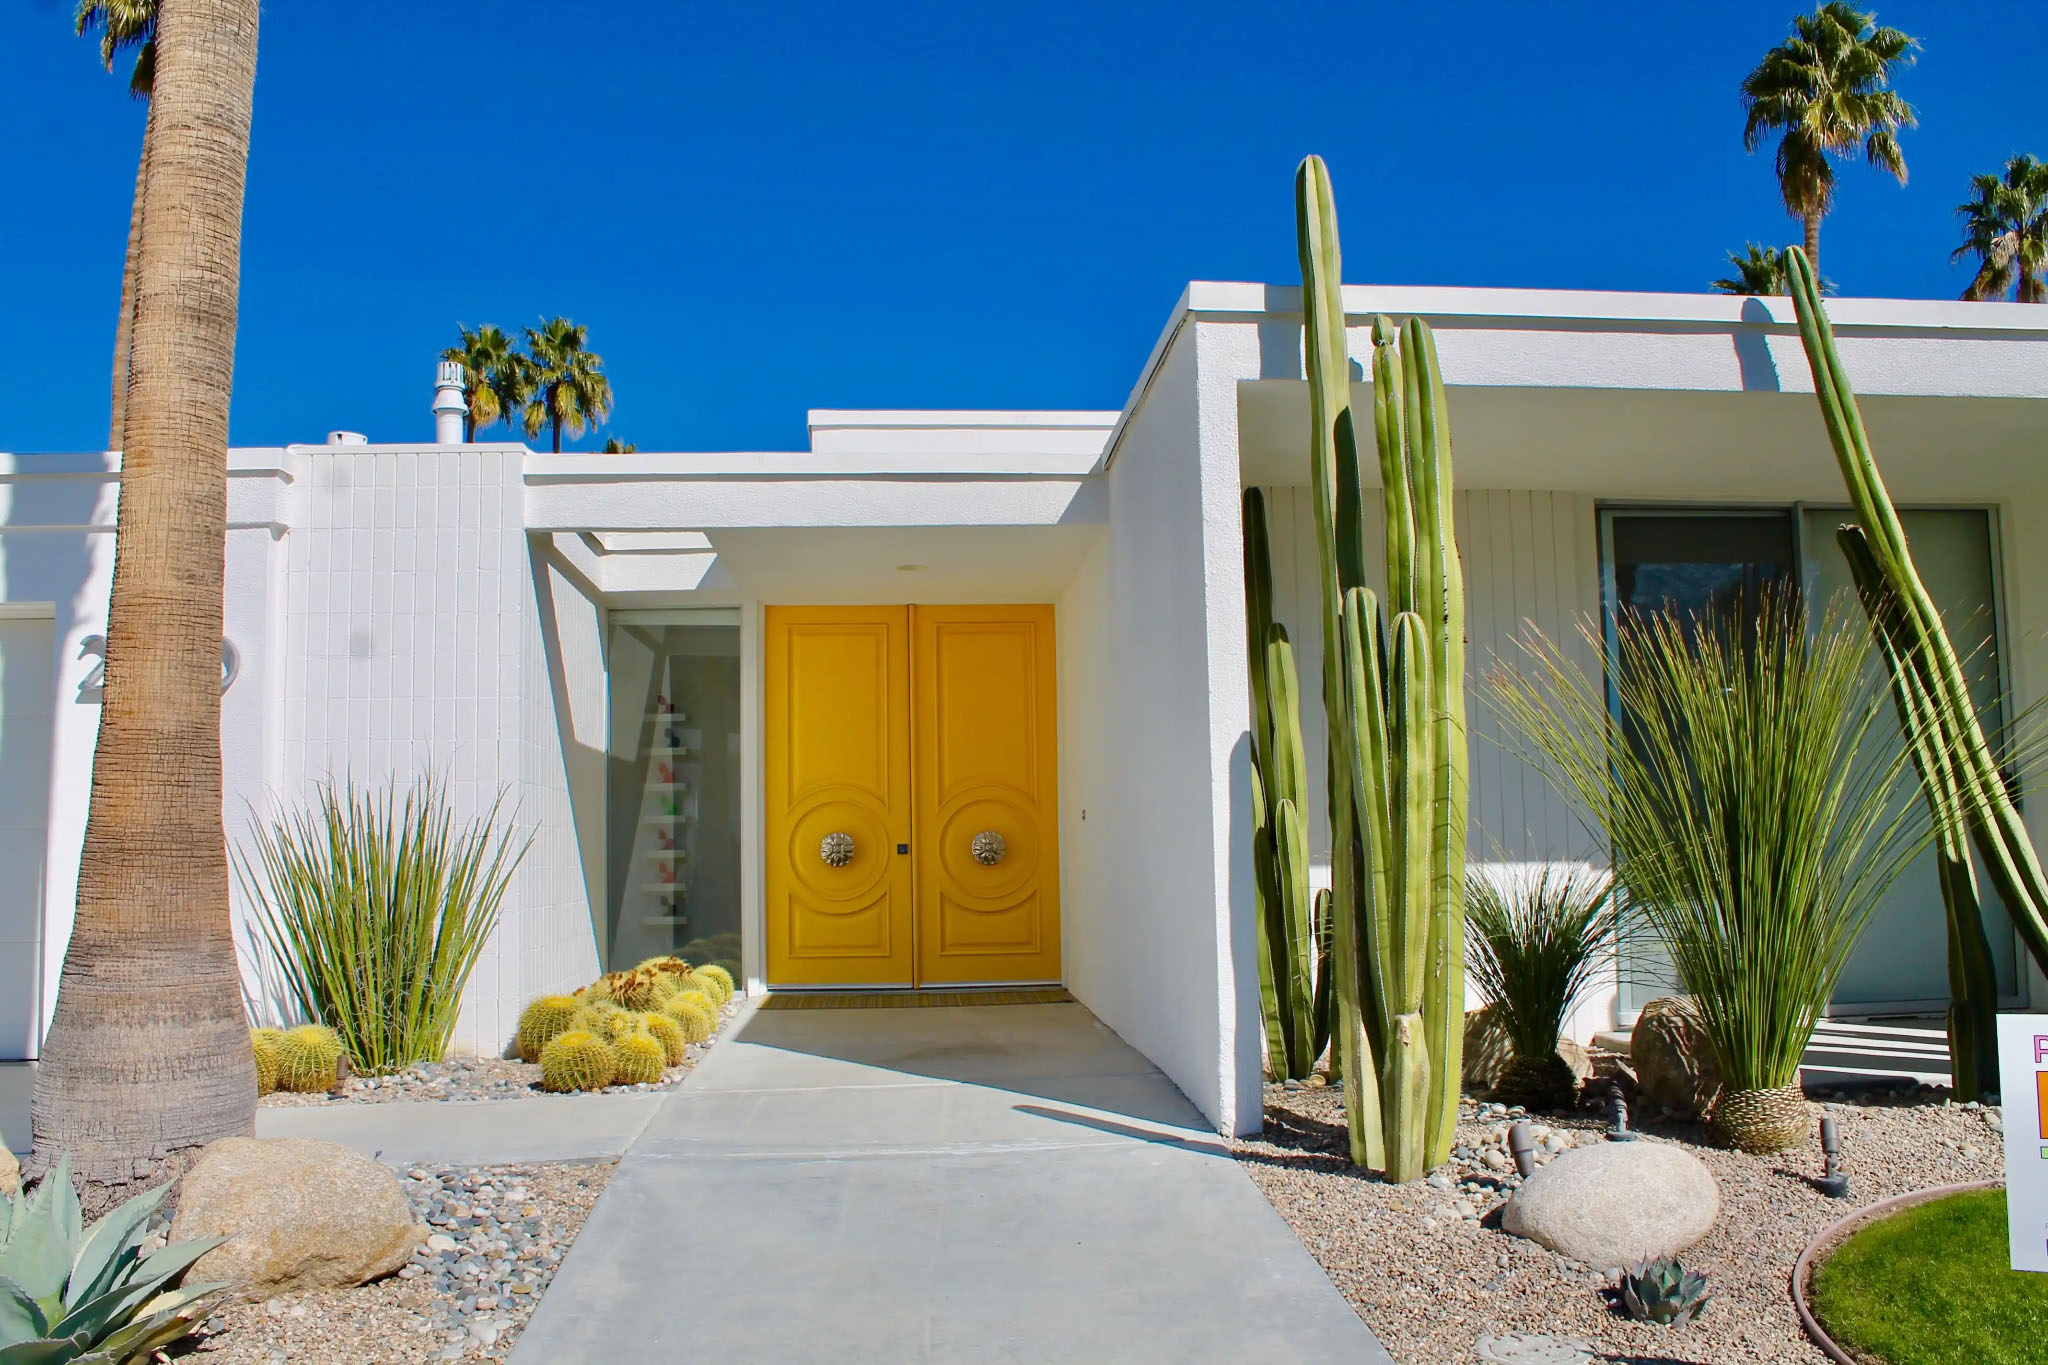 image of a white painted mid century modern house with tall yellow doors, with a xeriscaped front yard with palms and succulent cacti